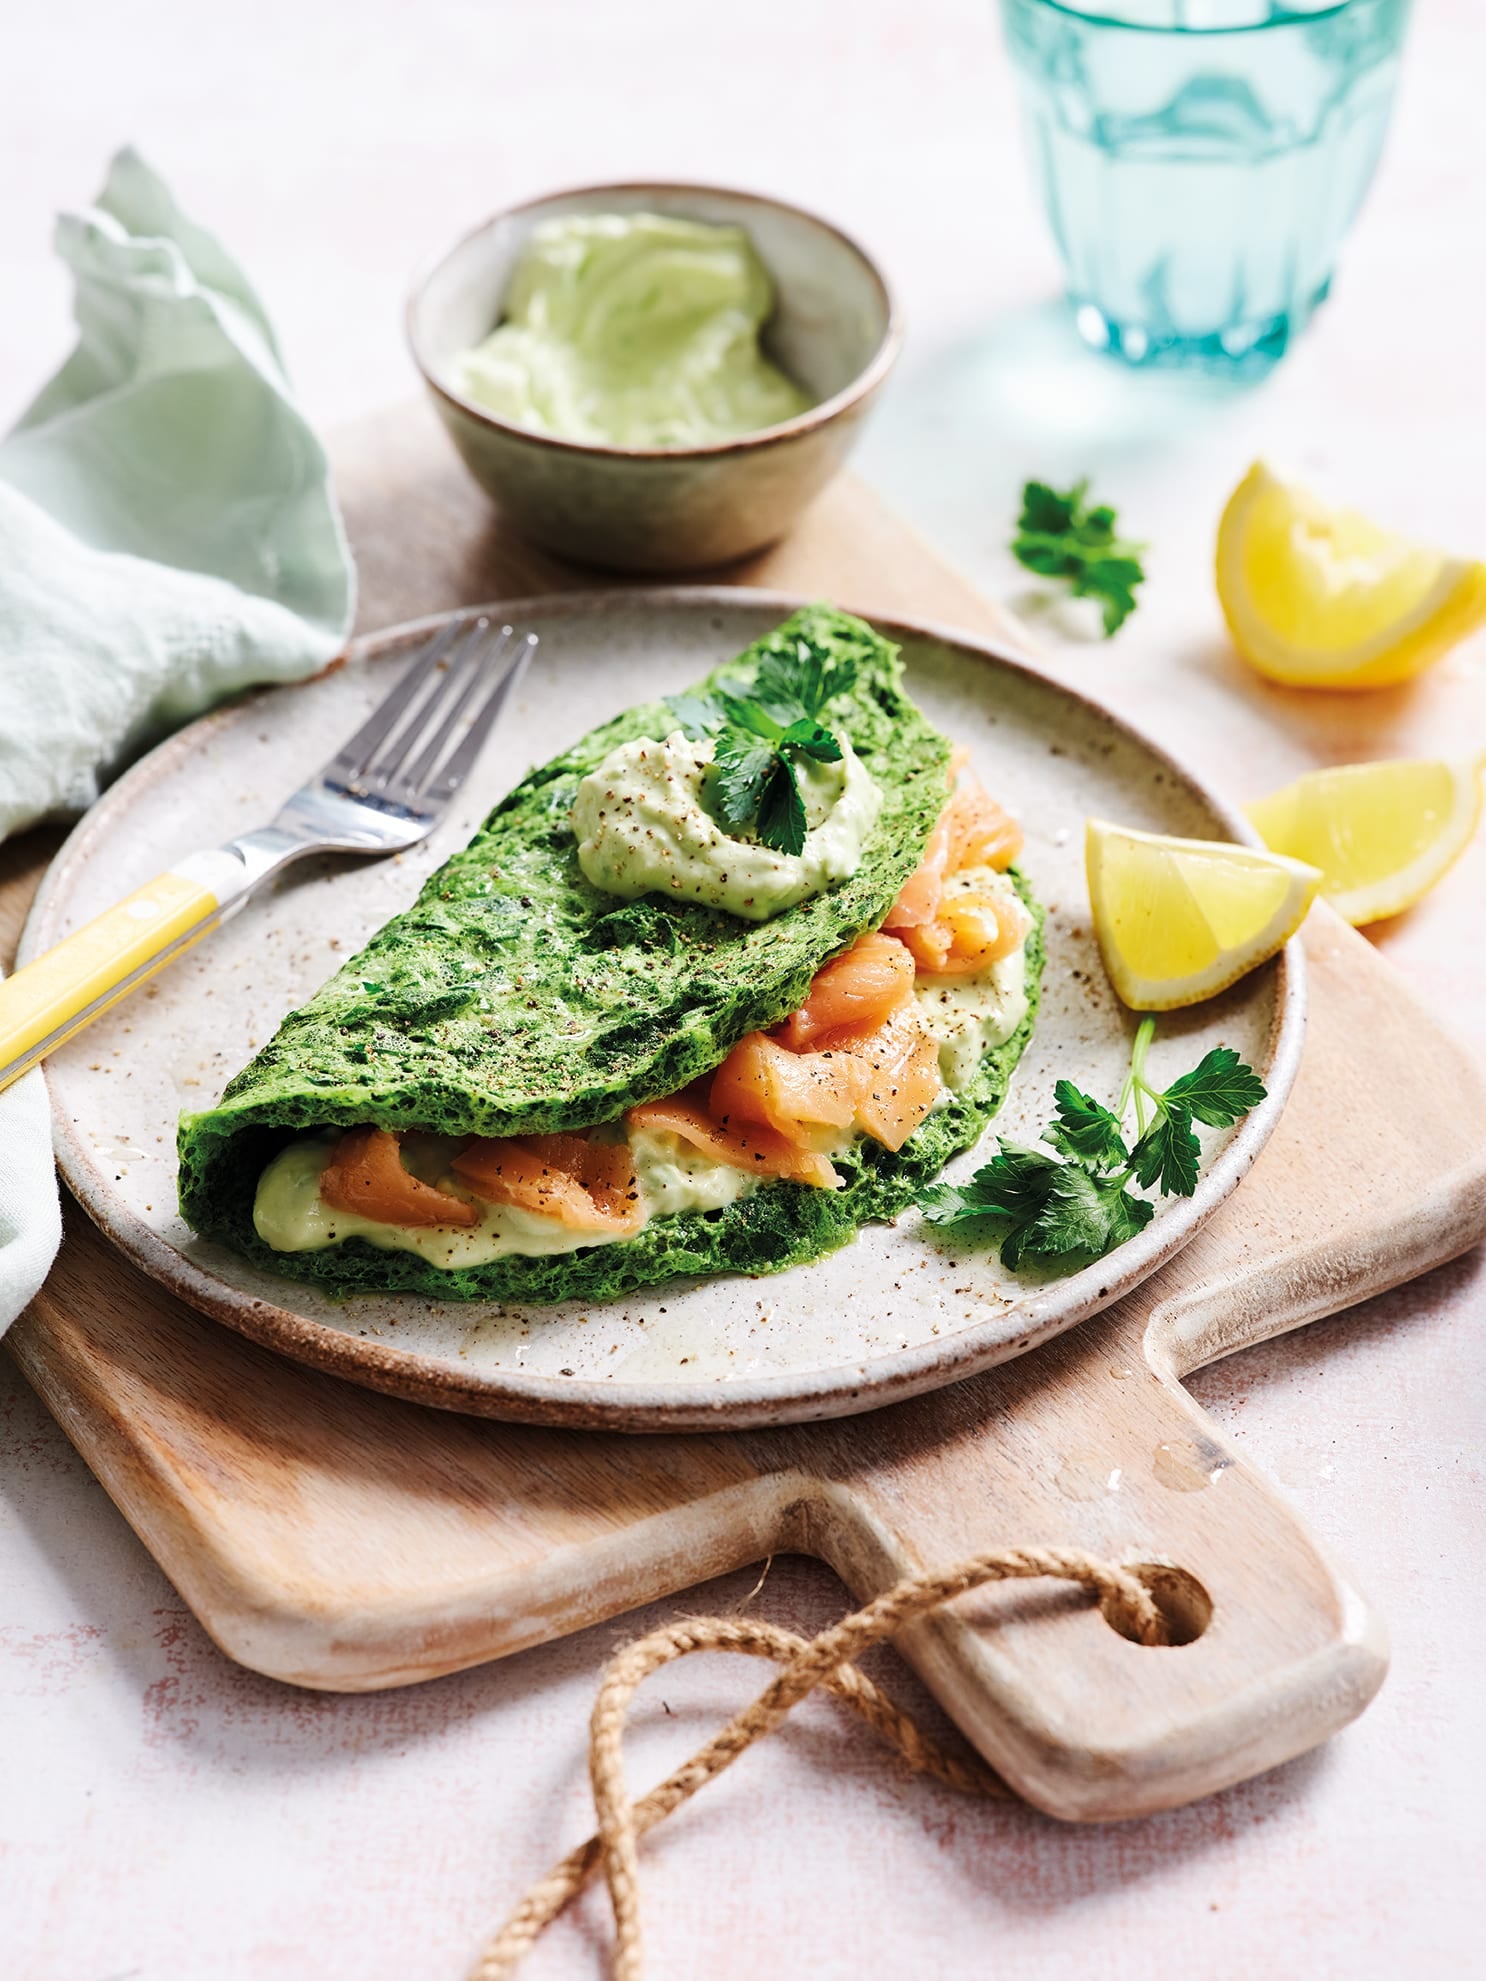 Spinat-Omelette mit Avocado & Lachs